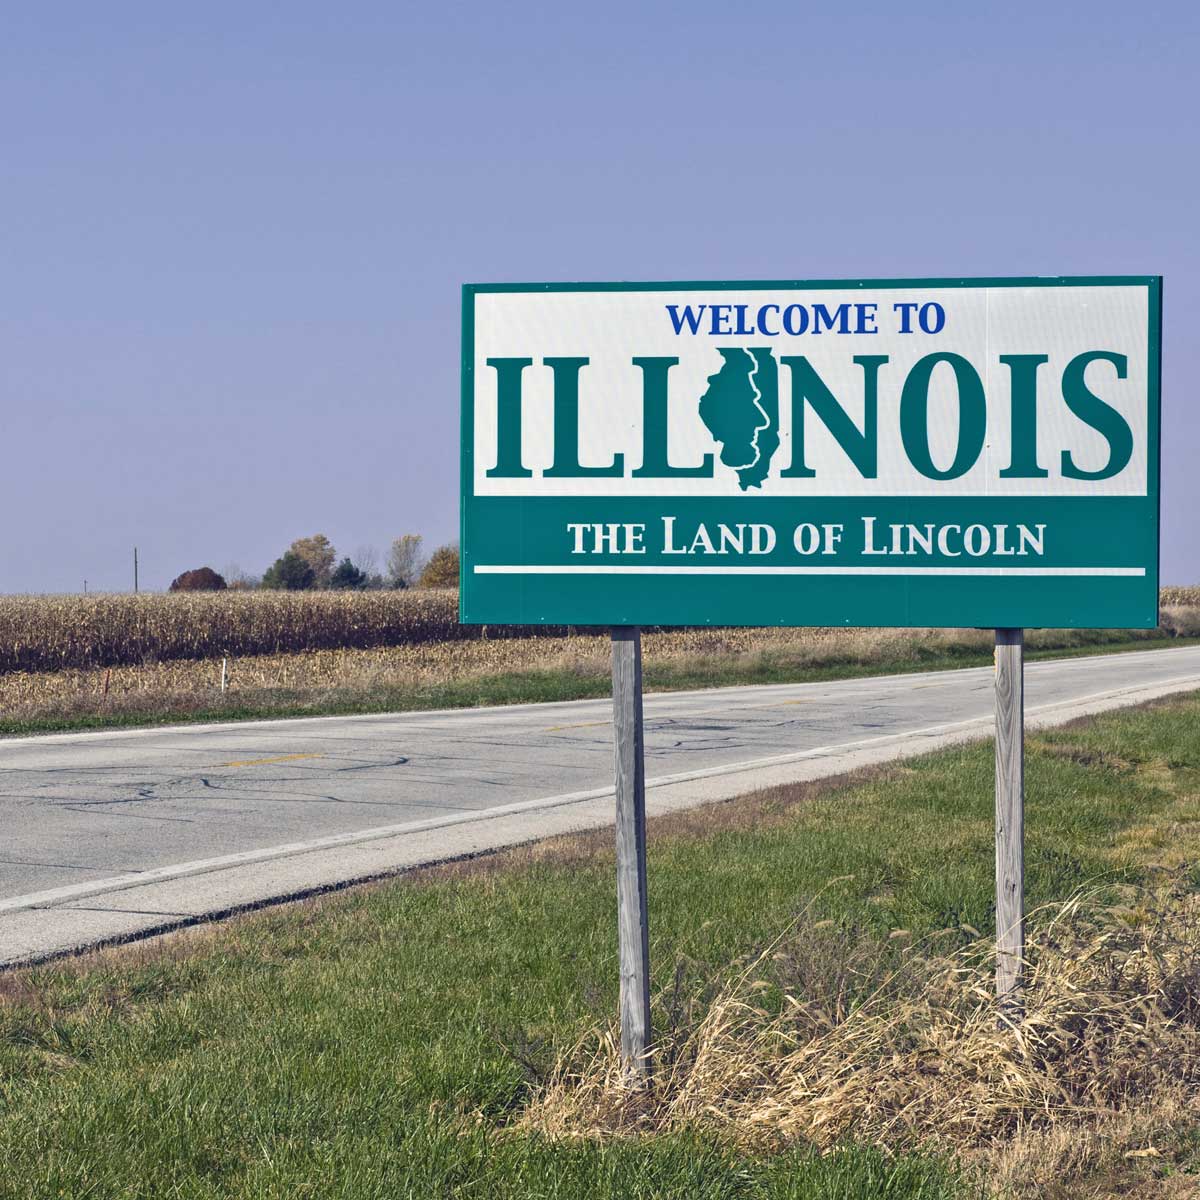 the welcome to Illinois state highway sign with a tagline of the land of lincoln